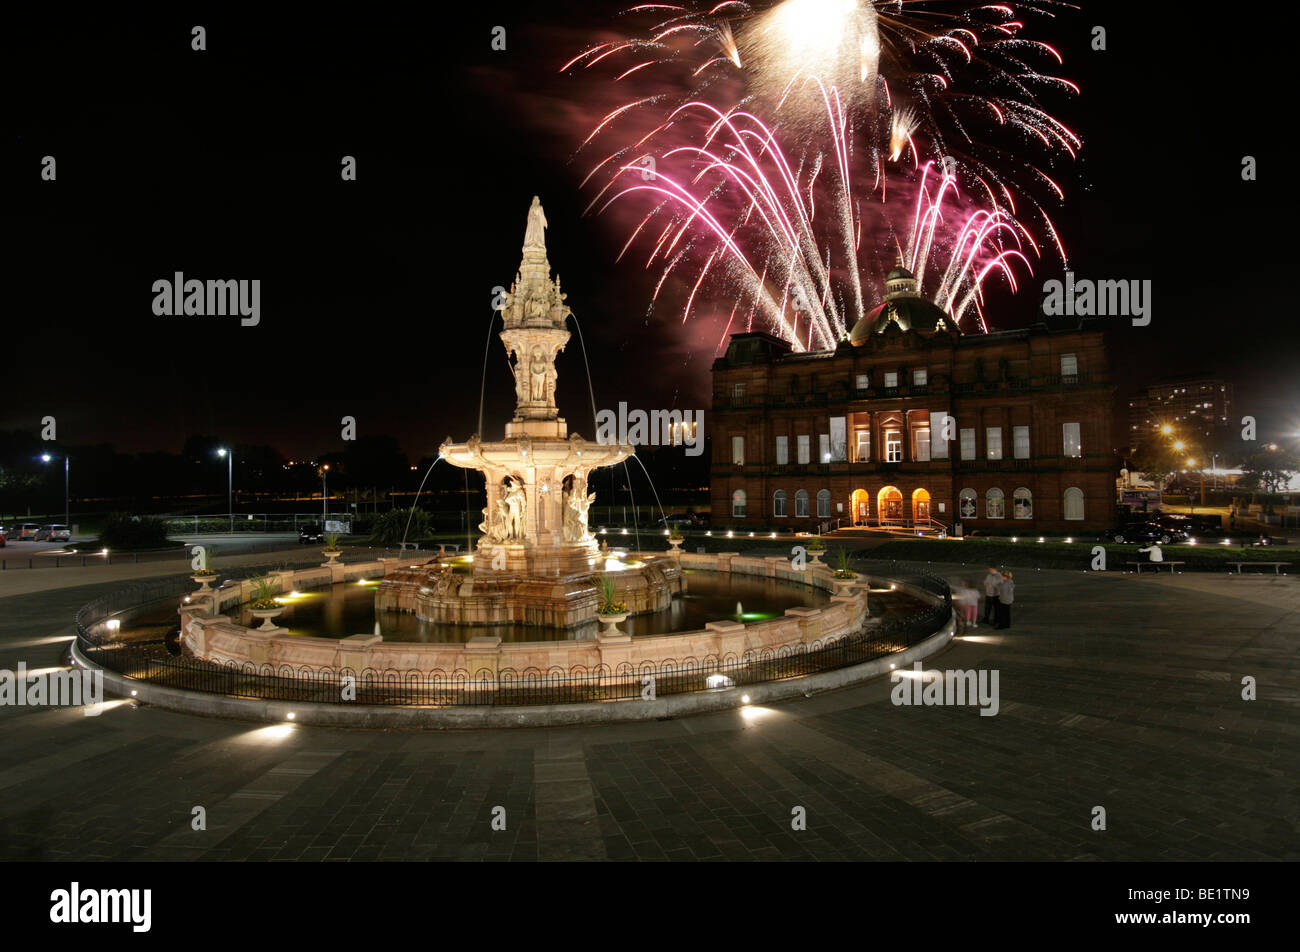 Fireworks over the People's palace, Glasgow Green, Glasgow, Scotland. Stock Photo